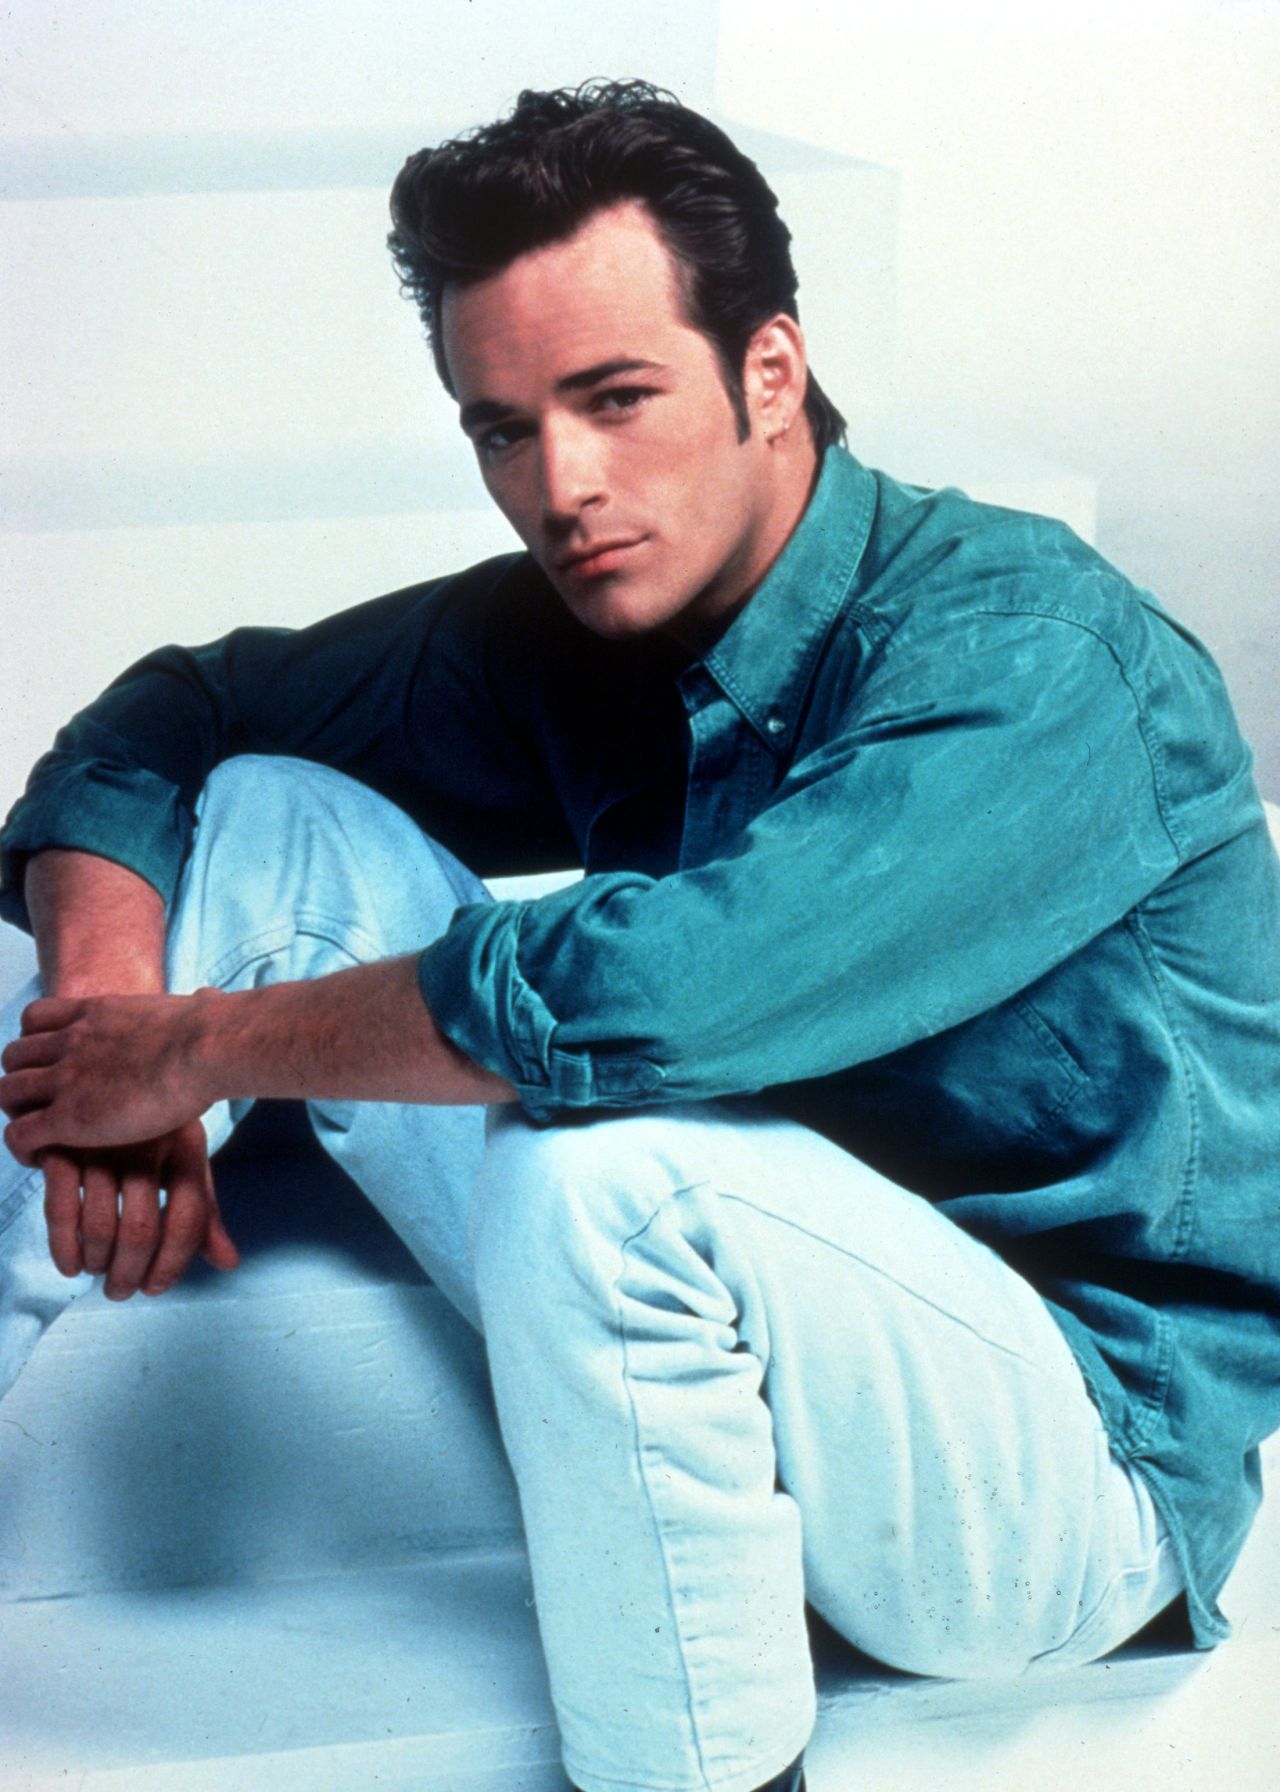 Actor <a href="https://www.cnn.com/2019/03/04/us/luke-perry-dies/index.html" target="_blank">Luke Perry</a>, who rose to stardom in the 1990s for his role on the hit television show "Beverly Hills, 90210," died March 4, after suffering a massive stroke, his publicist told CNN. He was 52.